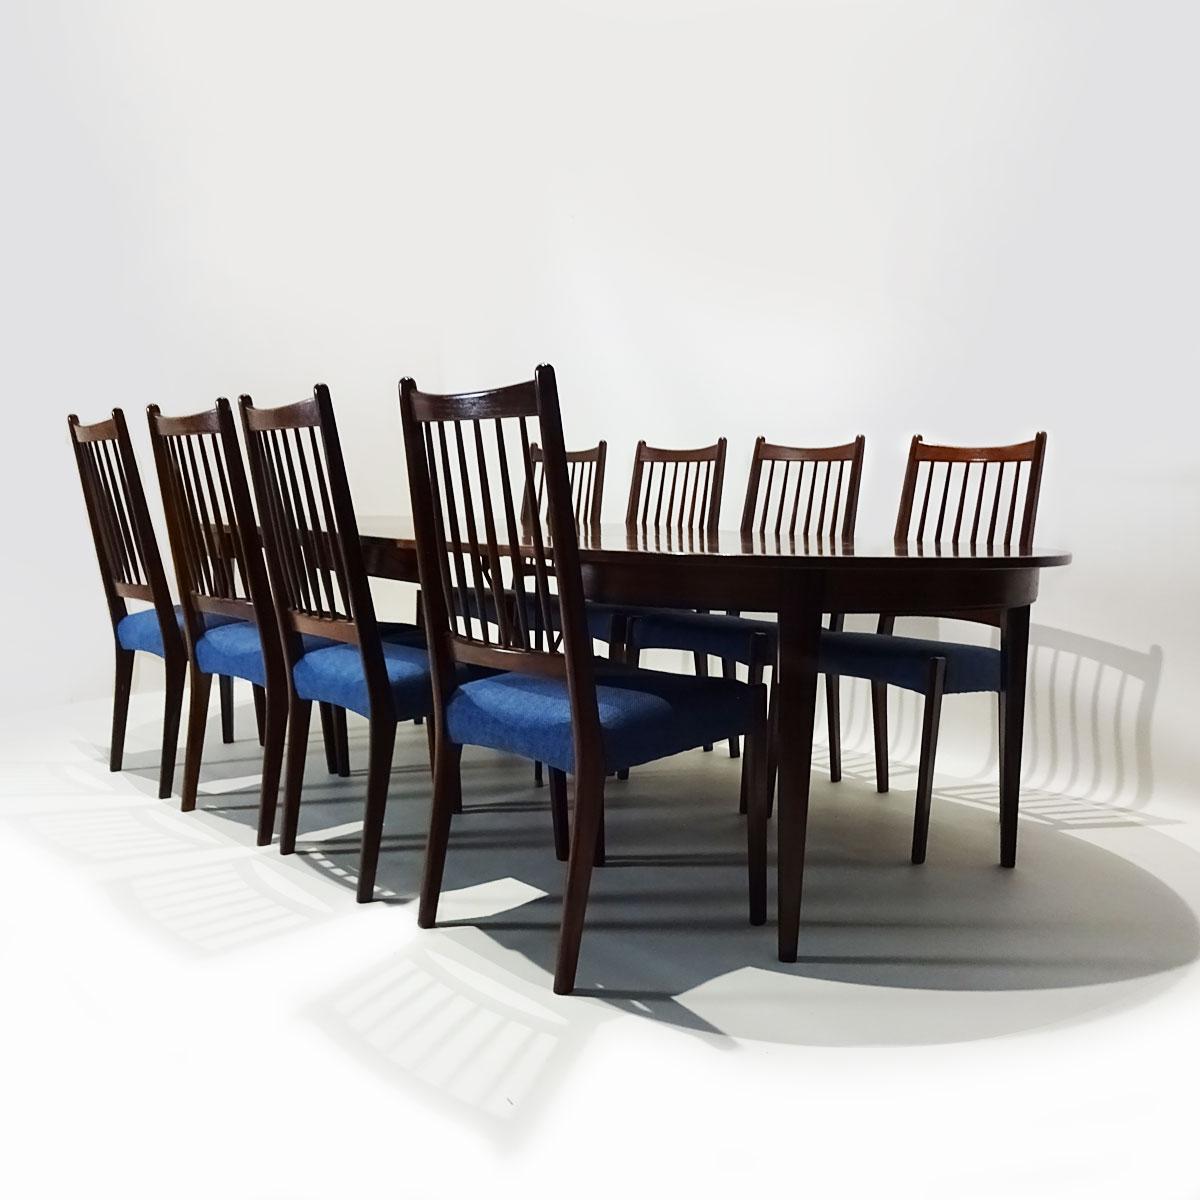 A large extending 10-seat Gunni Omann Model 55 rosewood extending dining table matched to 8 Arne Hovand Olsen dark teak and blue fabric rail back chairs.

Produced by Omann Jun Mobelfabrik in the 1960s this very practical extending dining table can